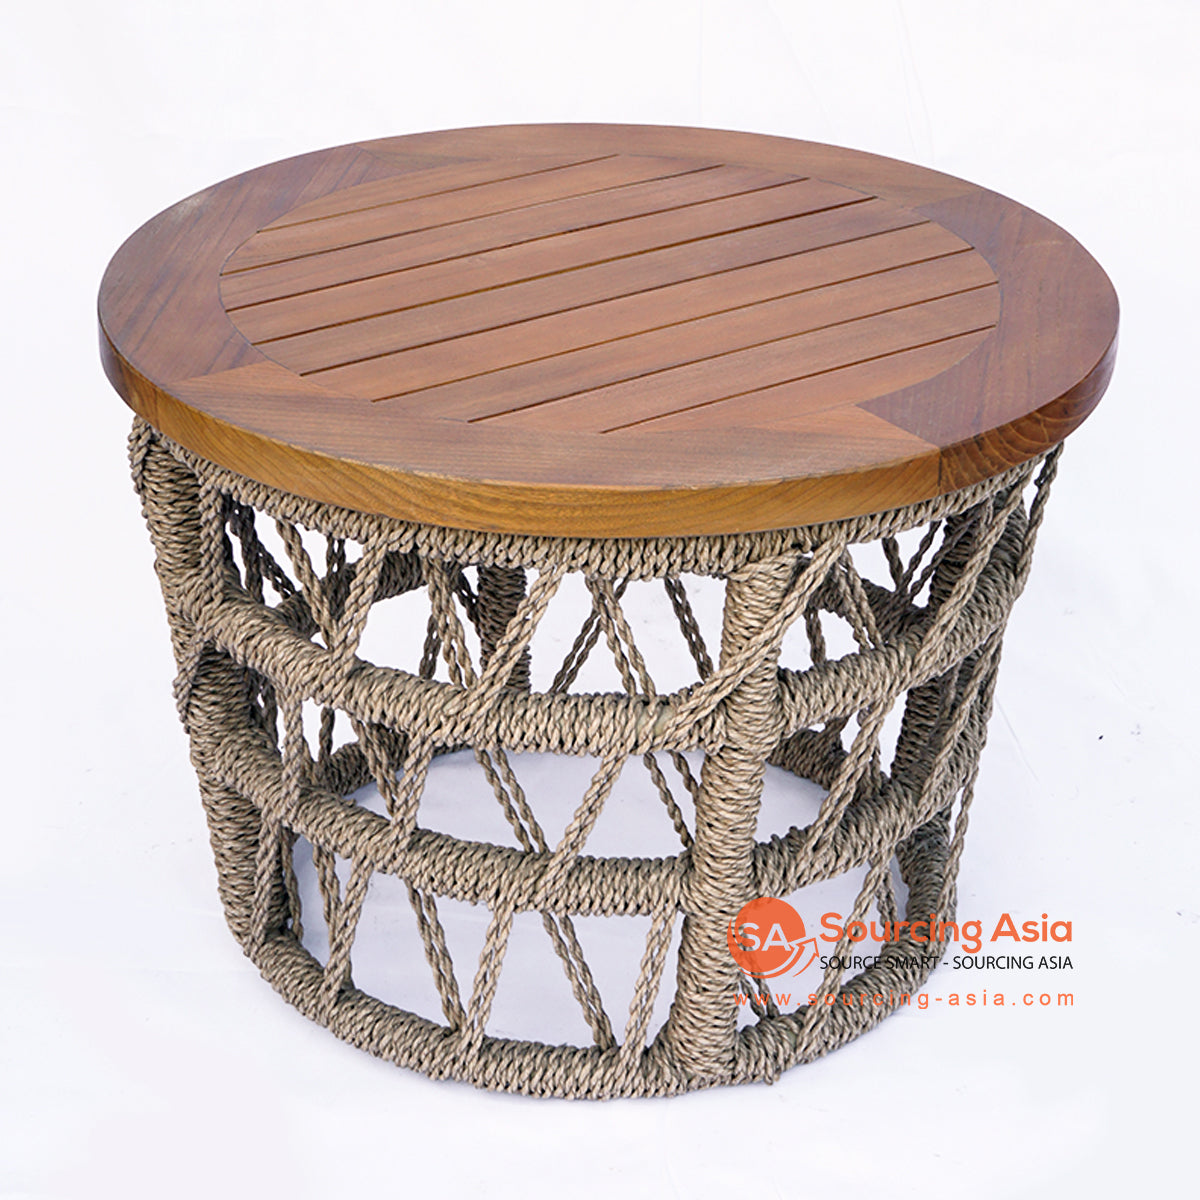 BNTC005-2 SYNTHETIC RATTAN COFFEE TABLE WITH WOODEN ROUND TOP